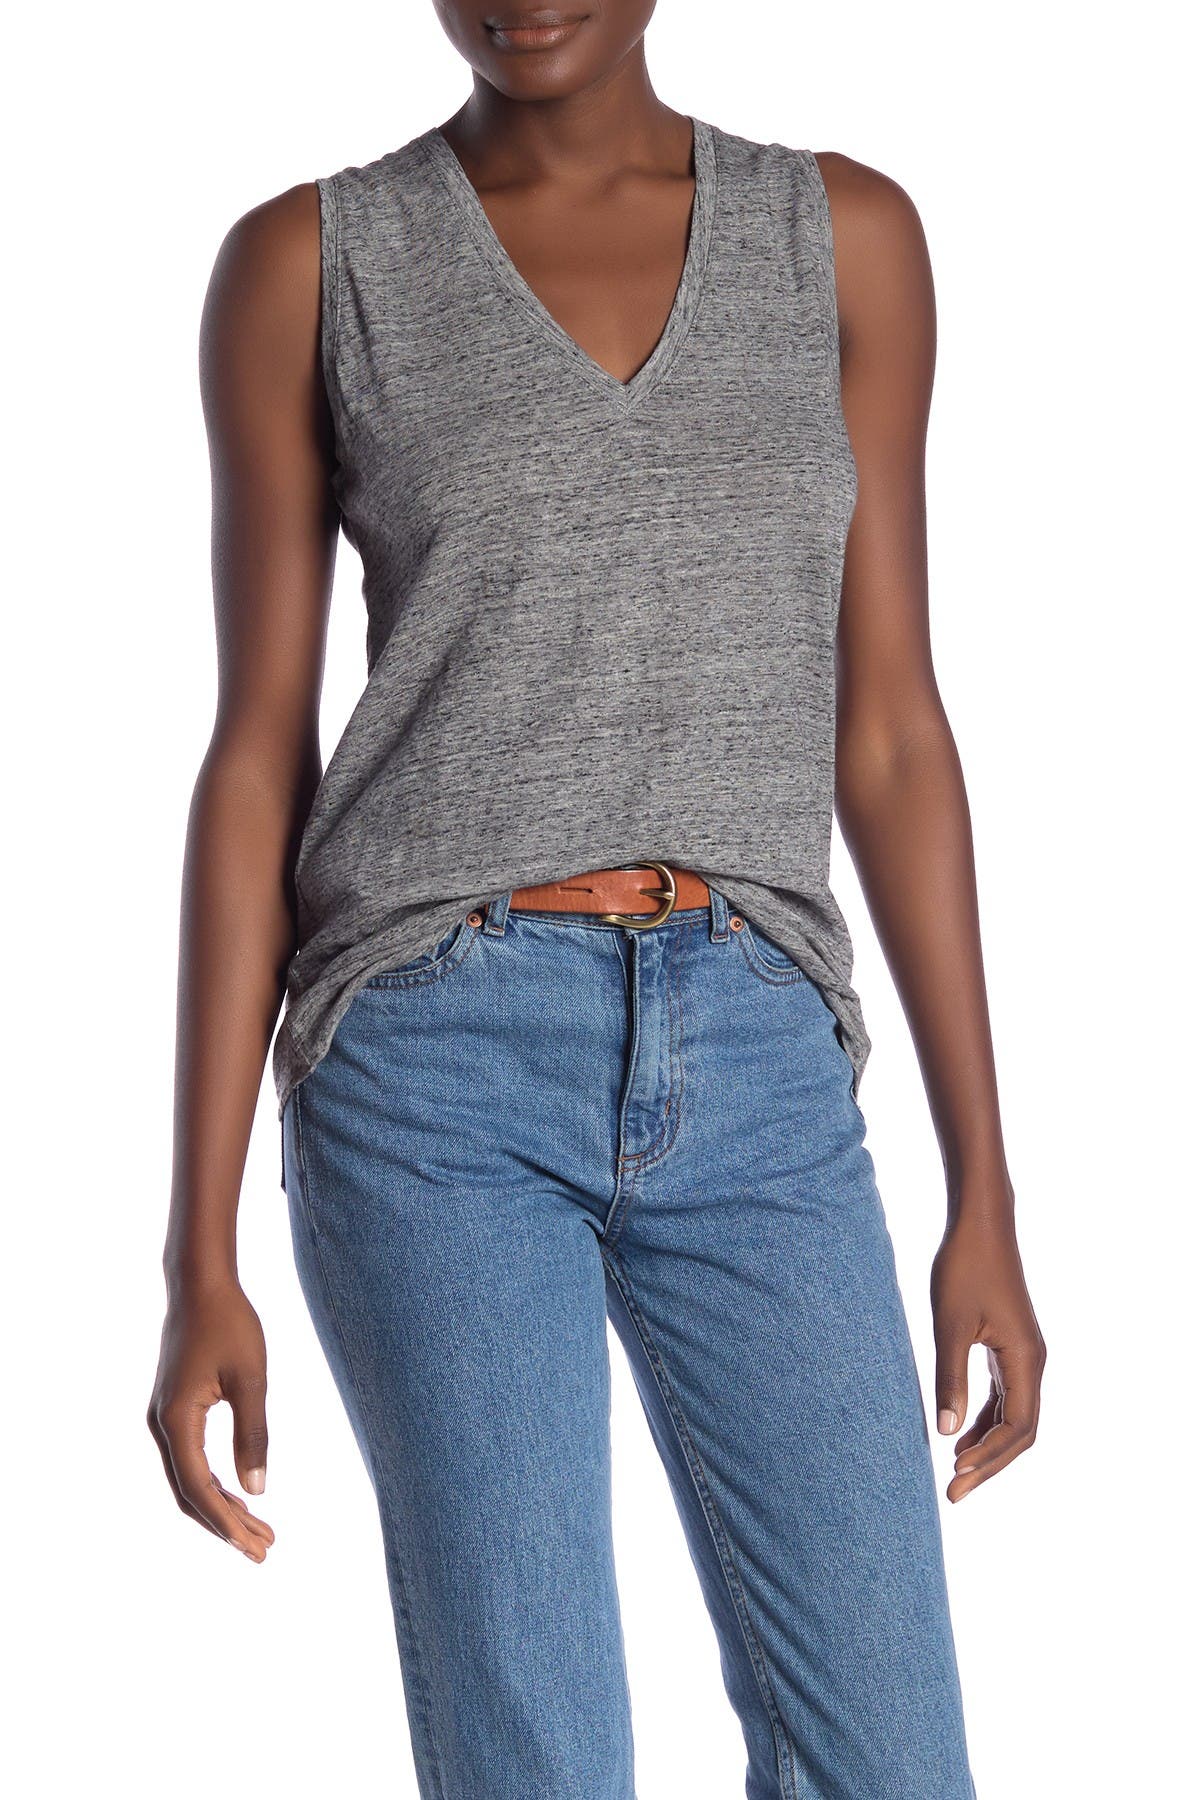 MADEWELL V-NECK KNIT TANK TOP,191208462353